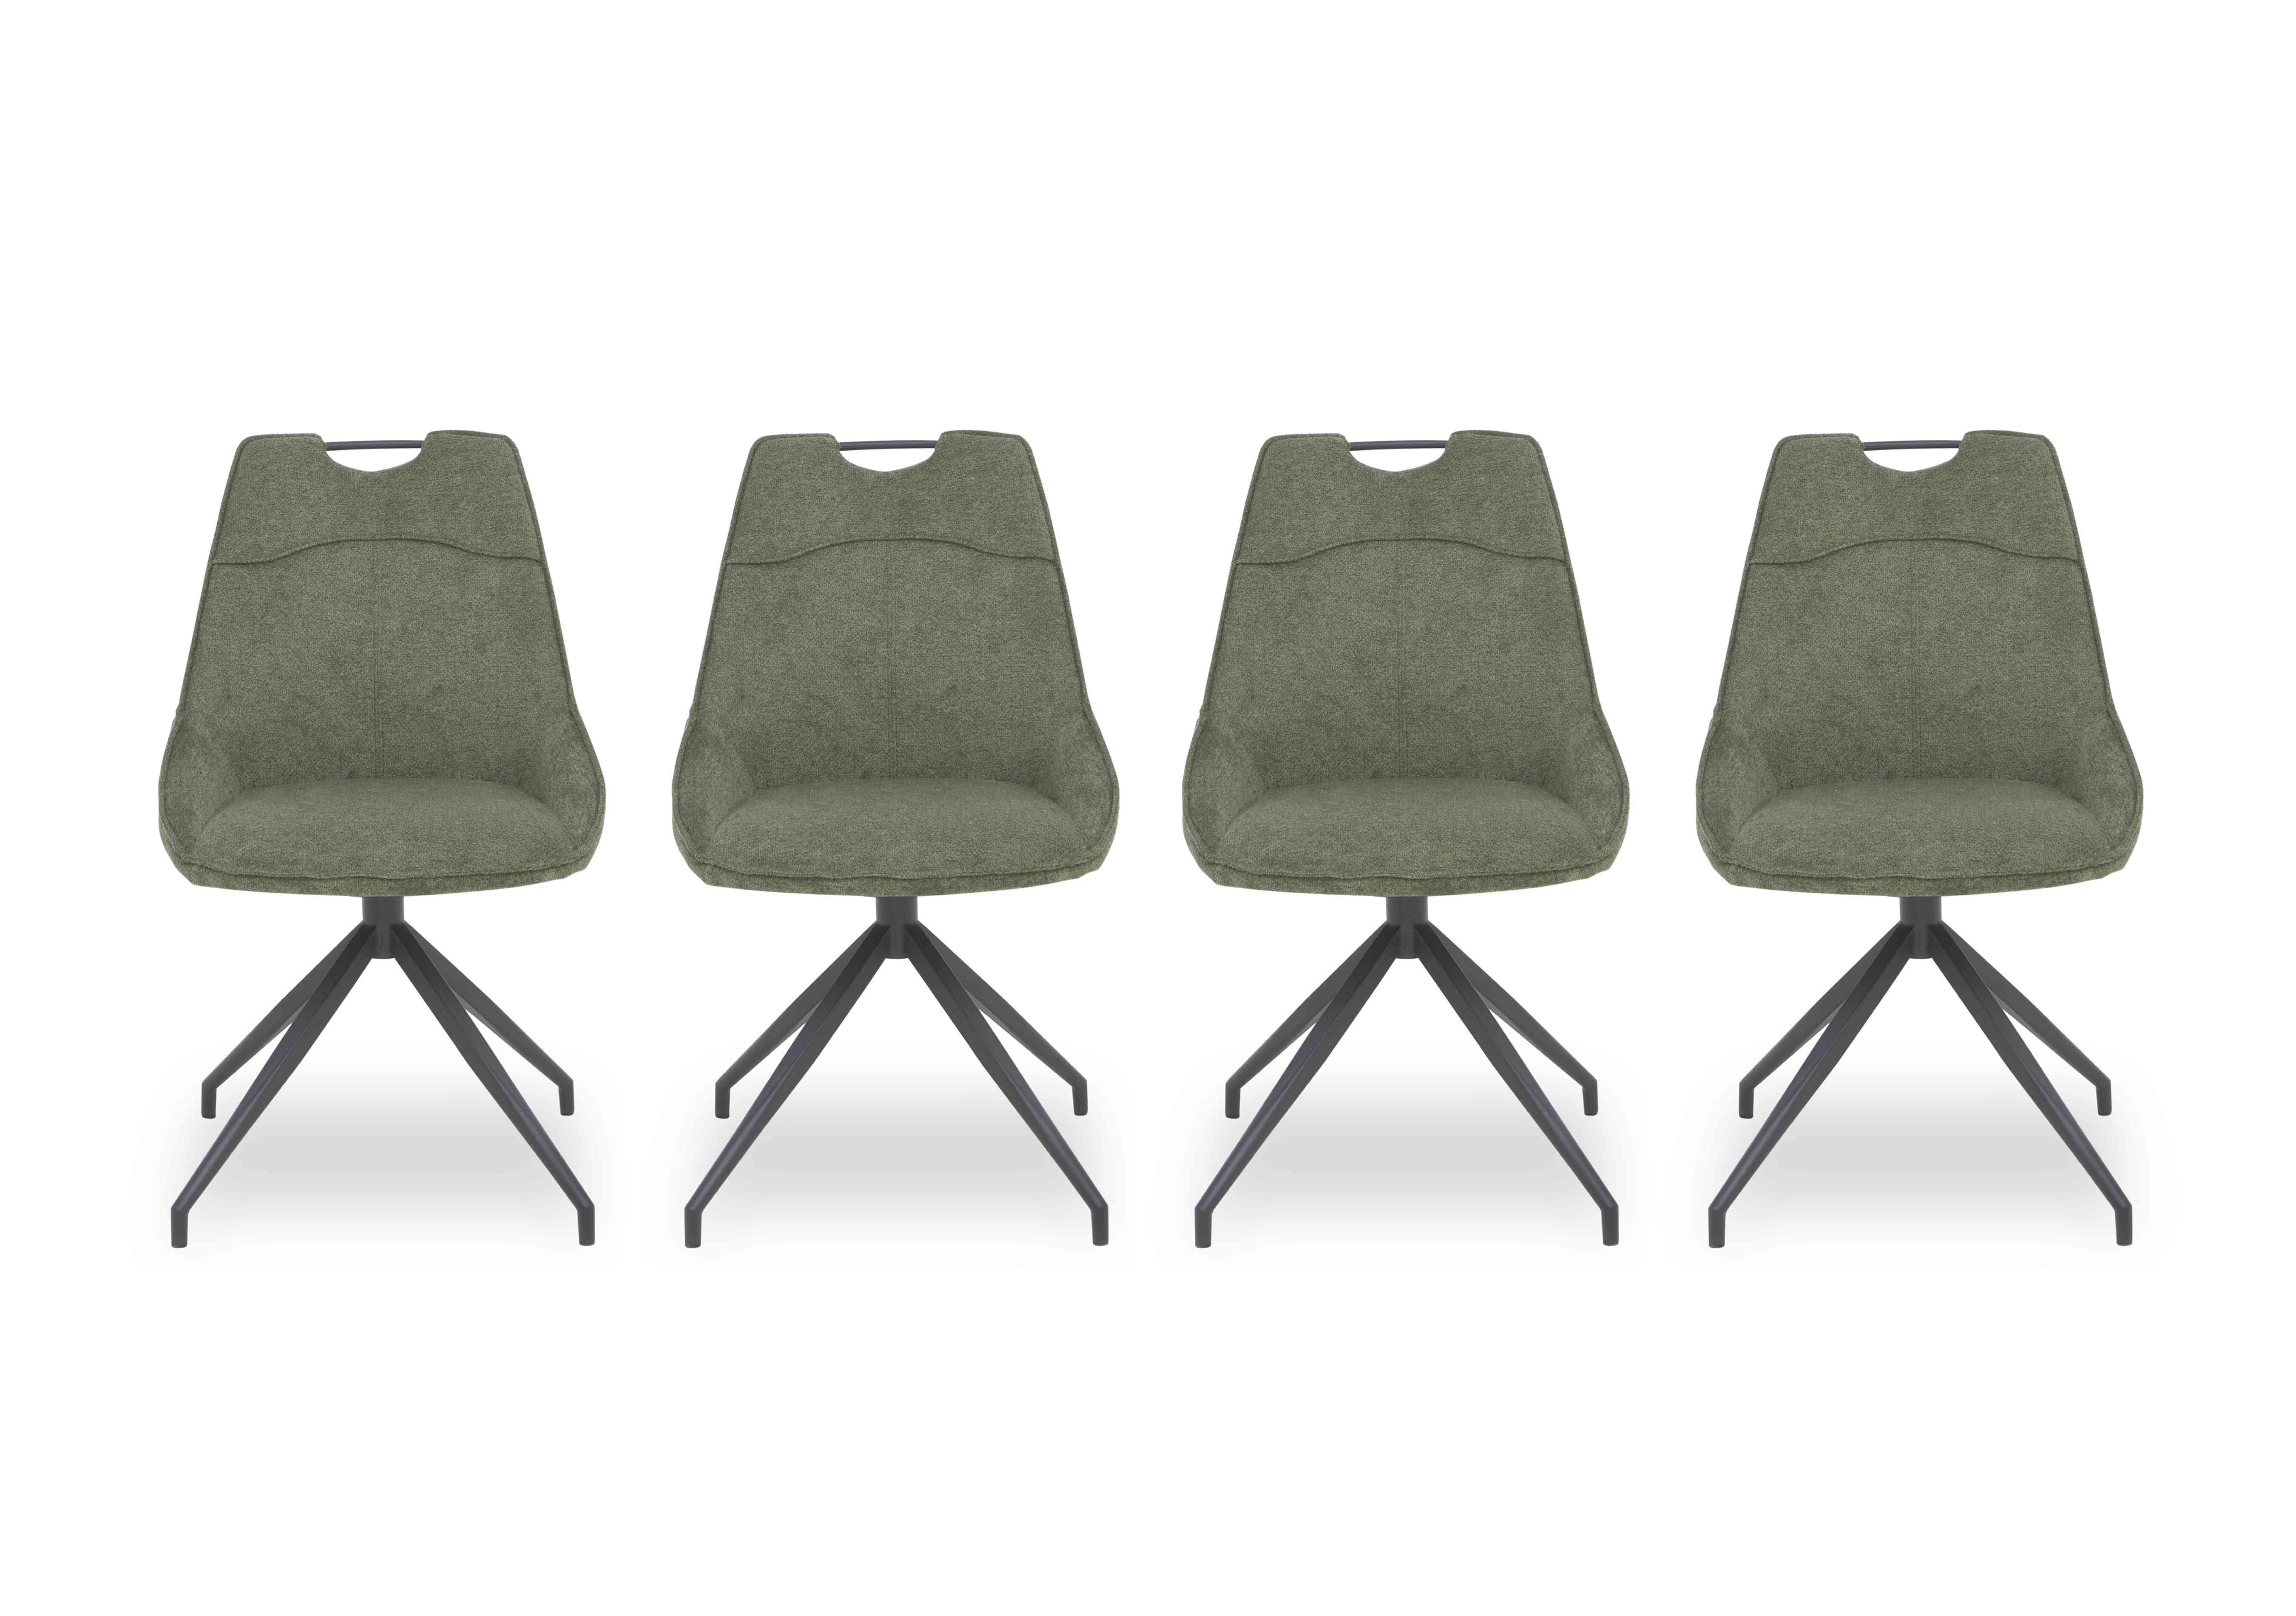 Pedro Set of 4 Fabric Swivel Dining Chairs in Green on Furniture Village